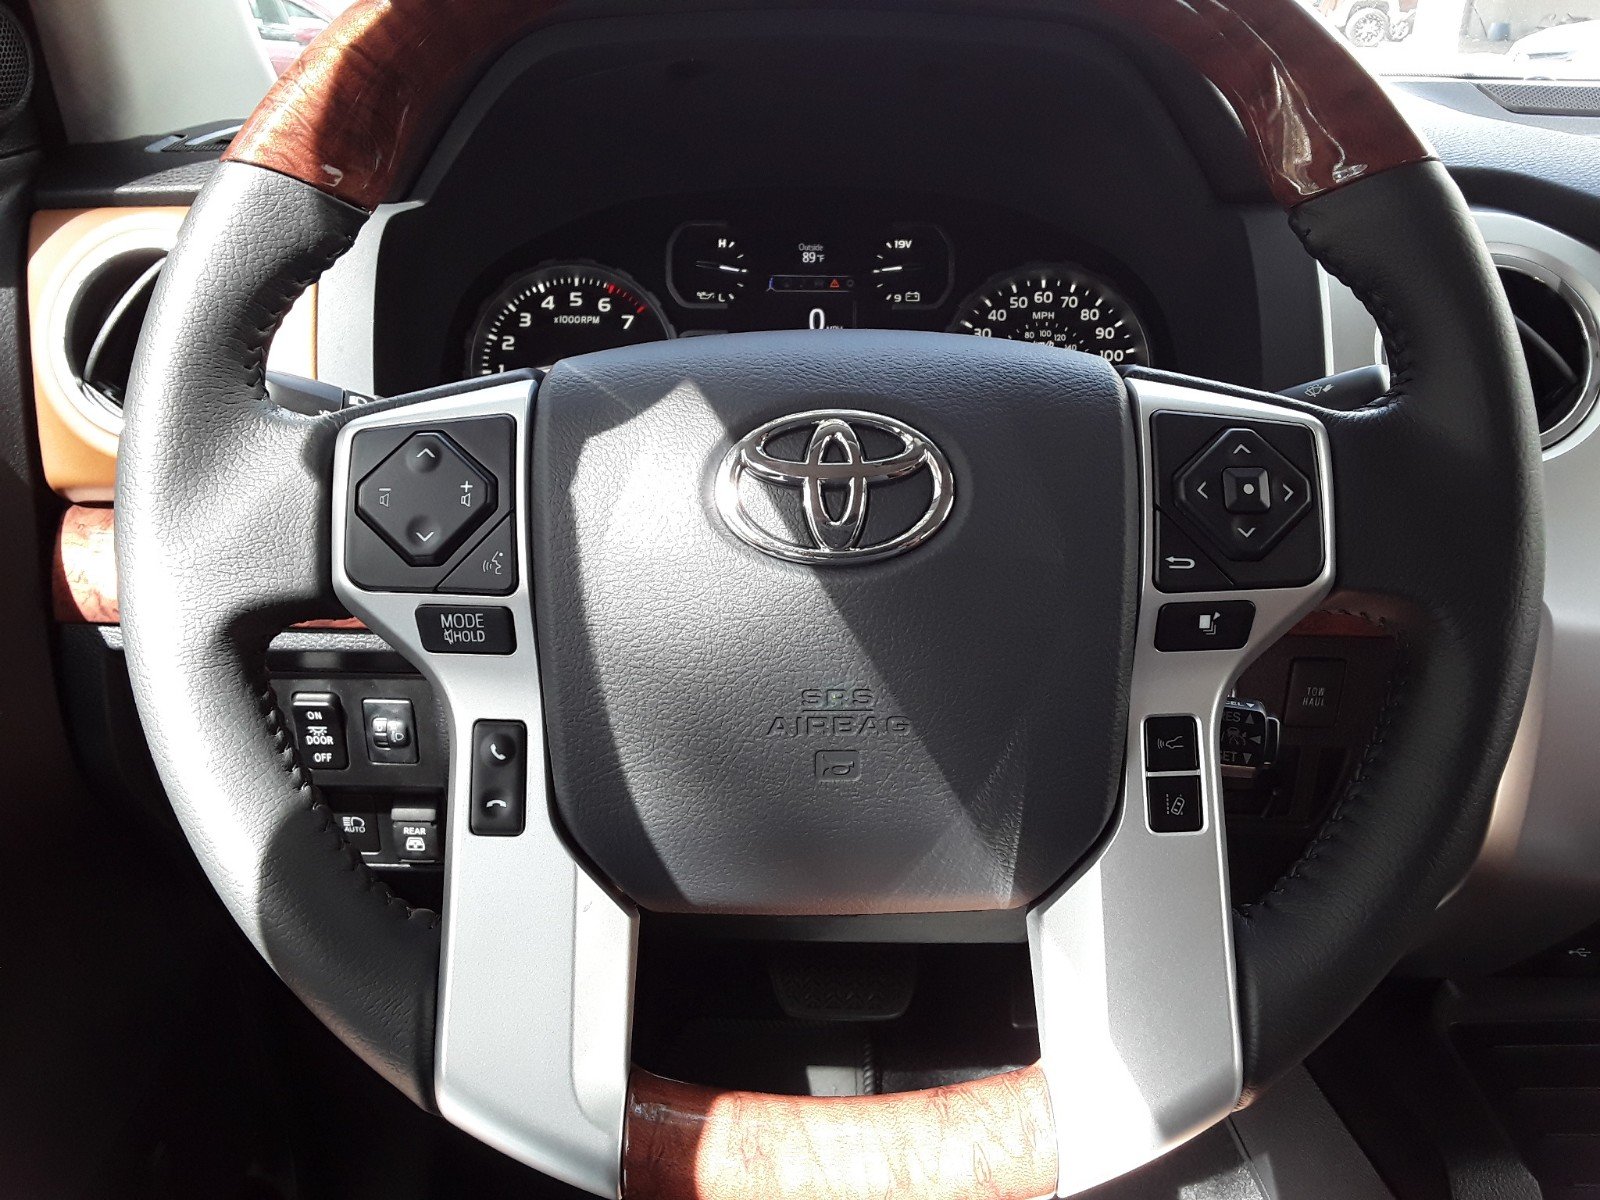 New 2020 Toyota Tundra 1794 Edition With Navigation